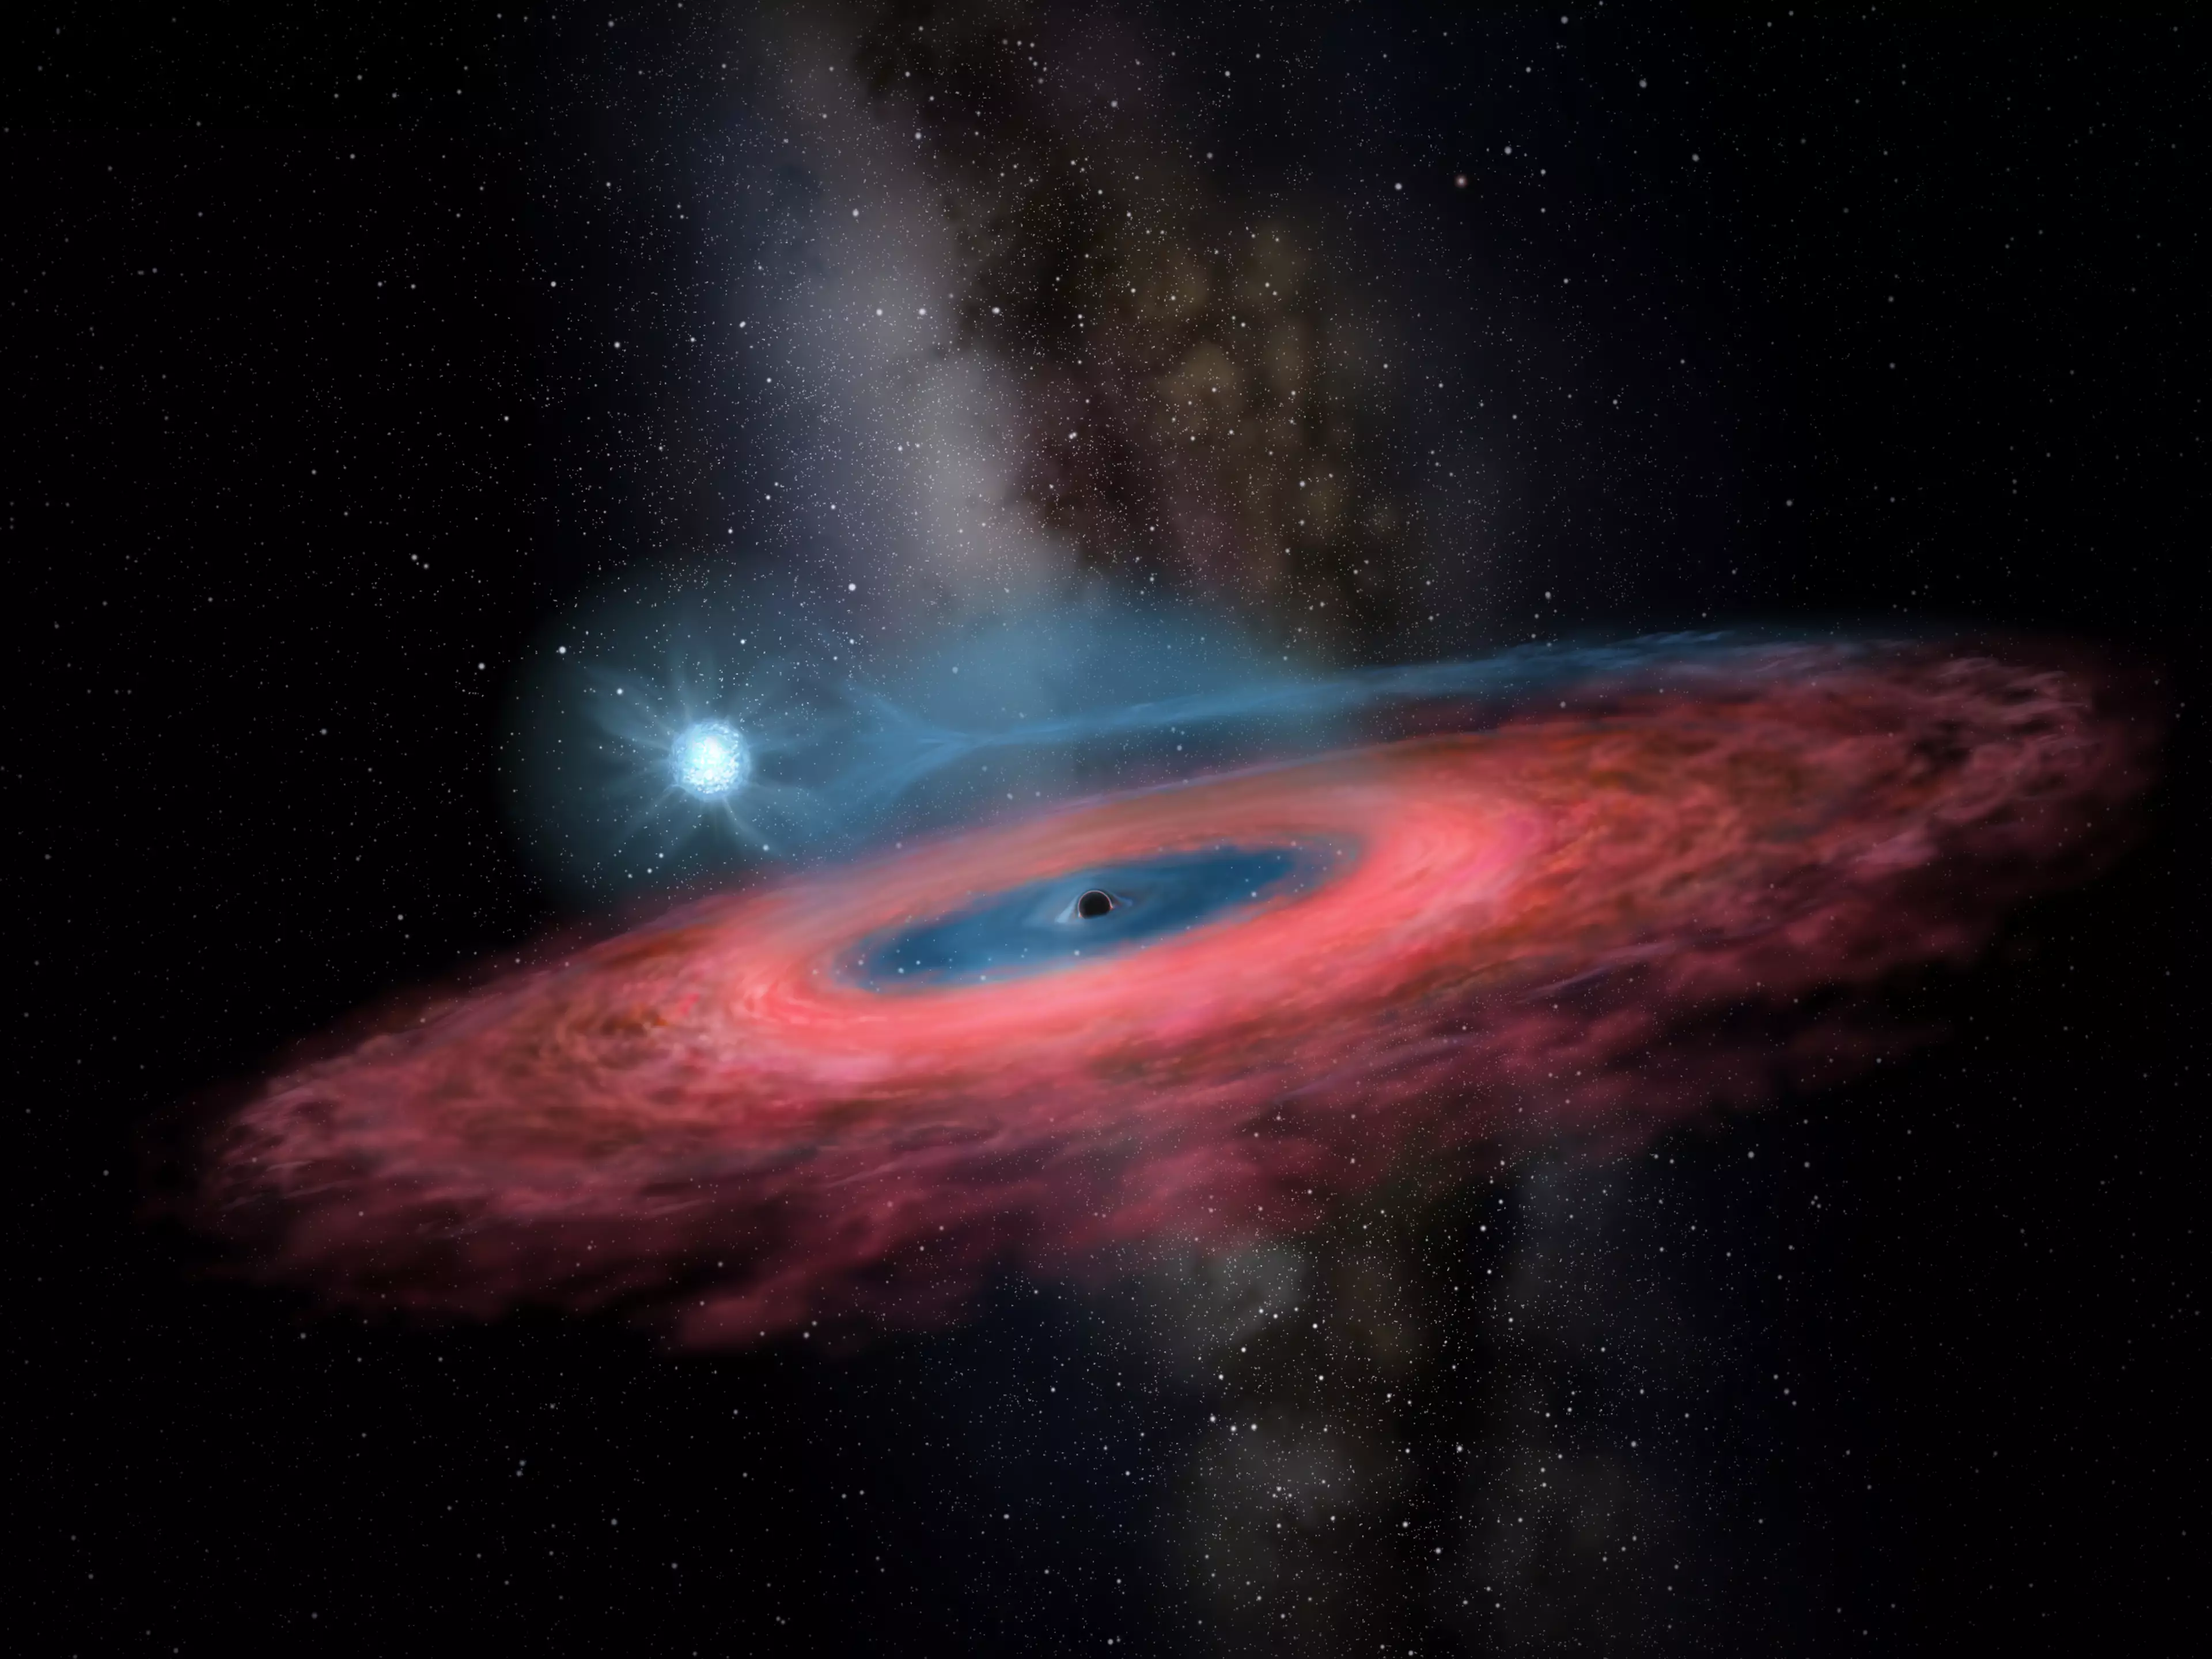 An artist's impression of another black hole.